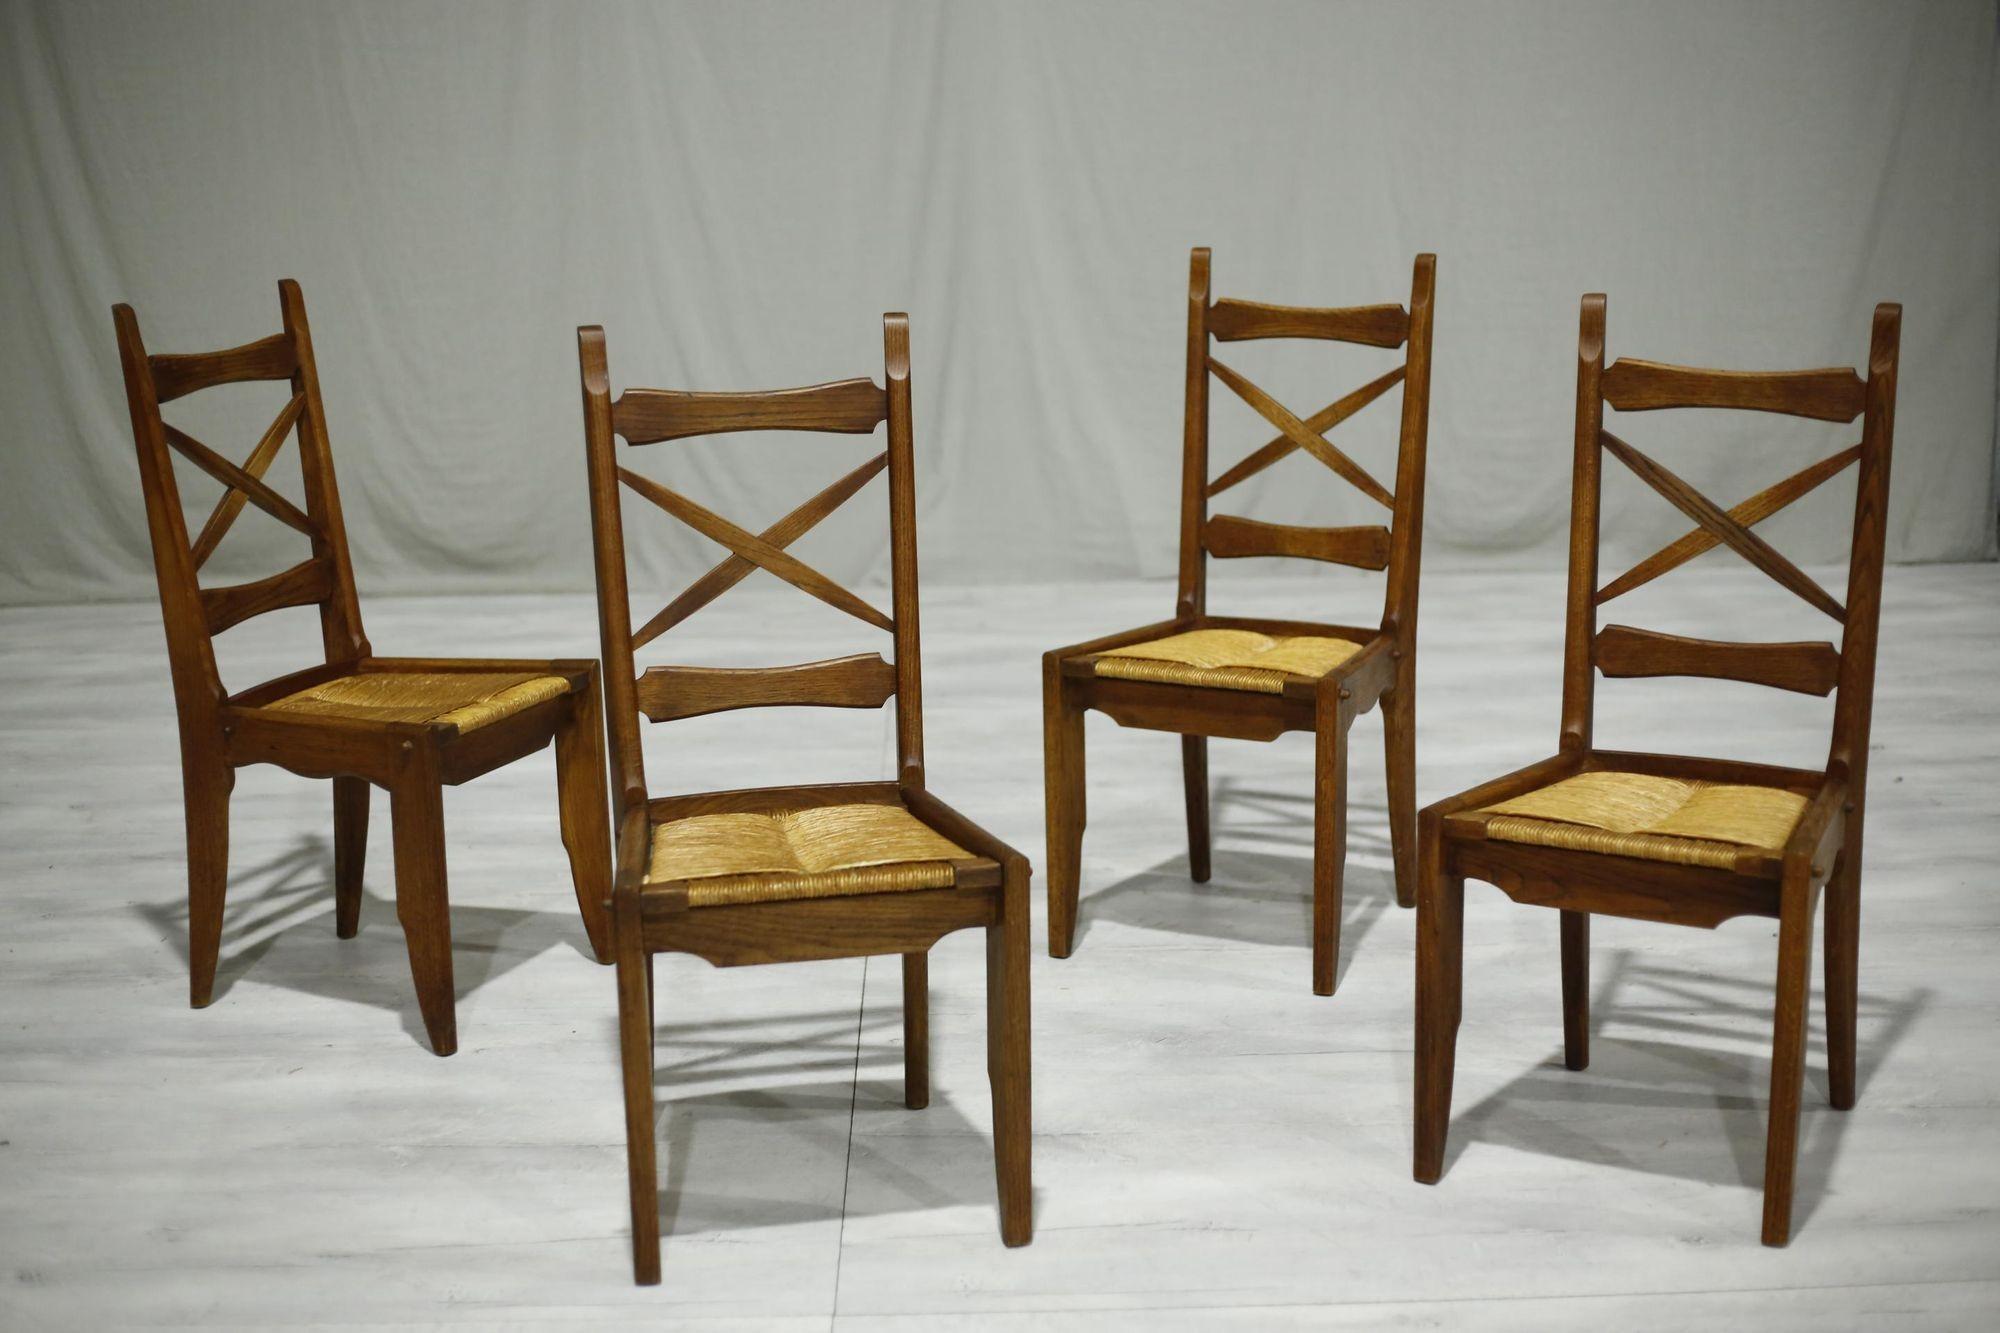 These are a beautiful quality set of French mid century dining chairs designed by the renowned Guillerme et Chambron.

These chairs are in gorgeous original condition with no major issues. The rush seats are in perfect order meaning these are fine